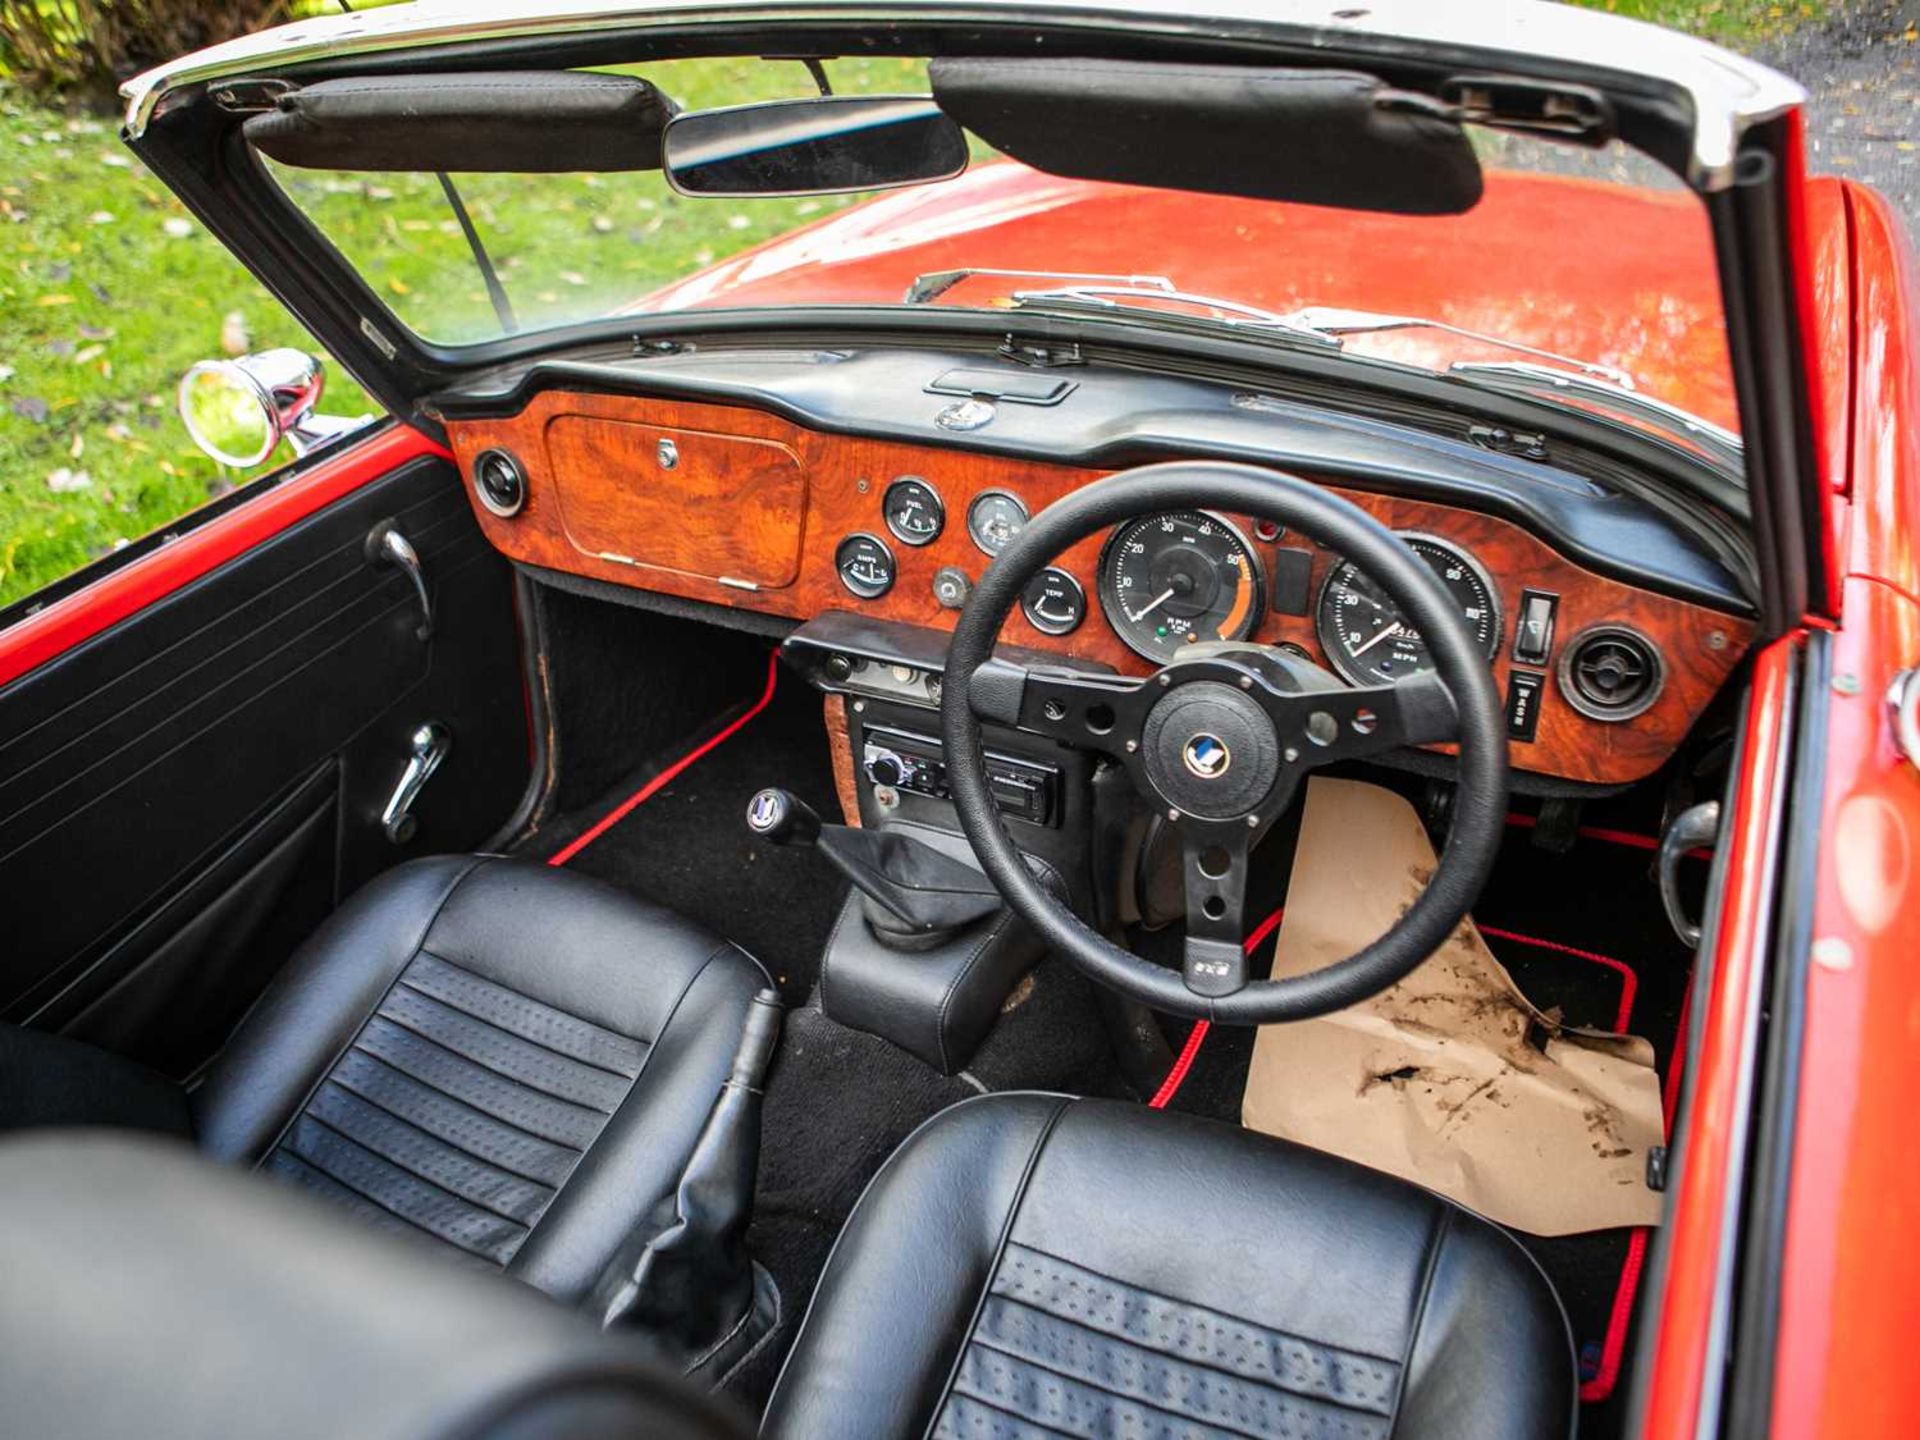 1969 Triumph TR6 Repatriated in 2020, converted to RHD and equipped with UK-specification SU carbure - Image 33 of 53